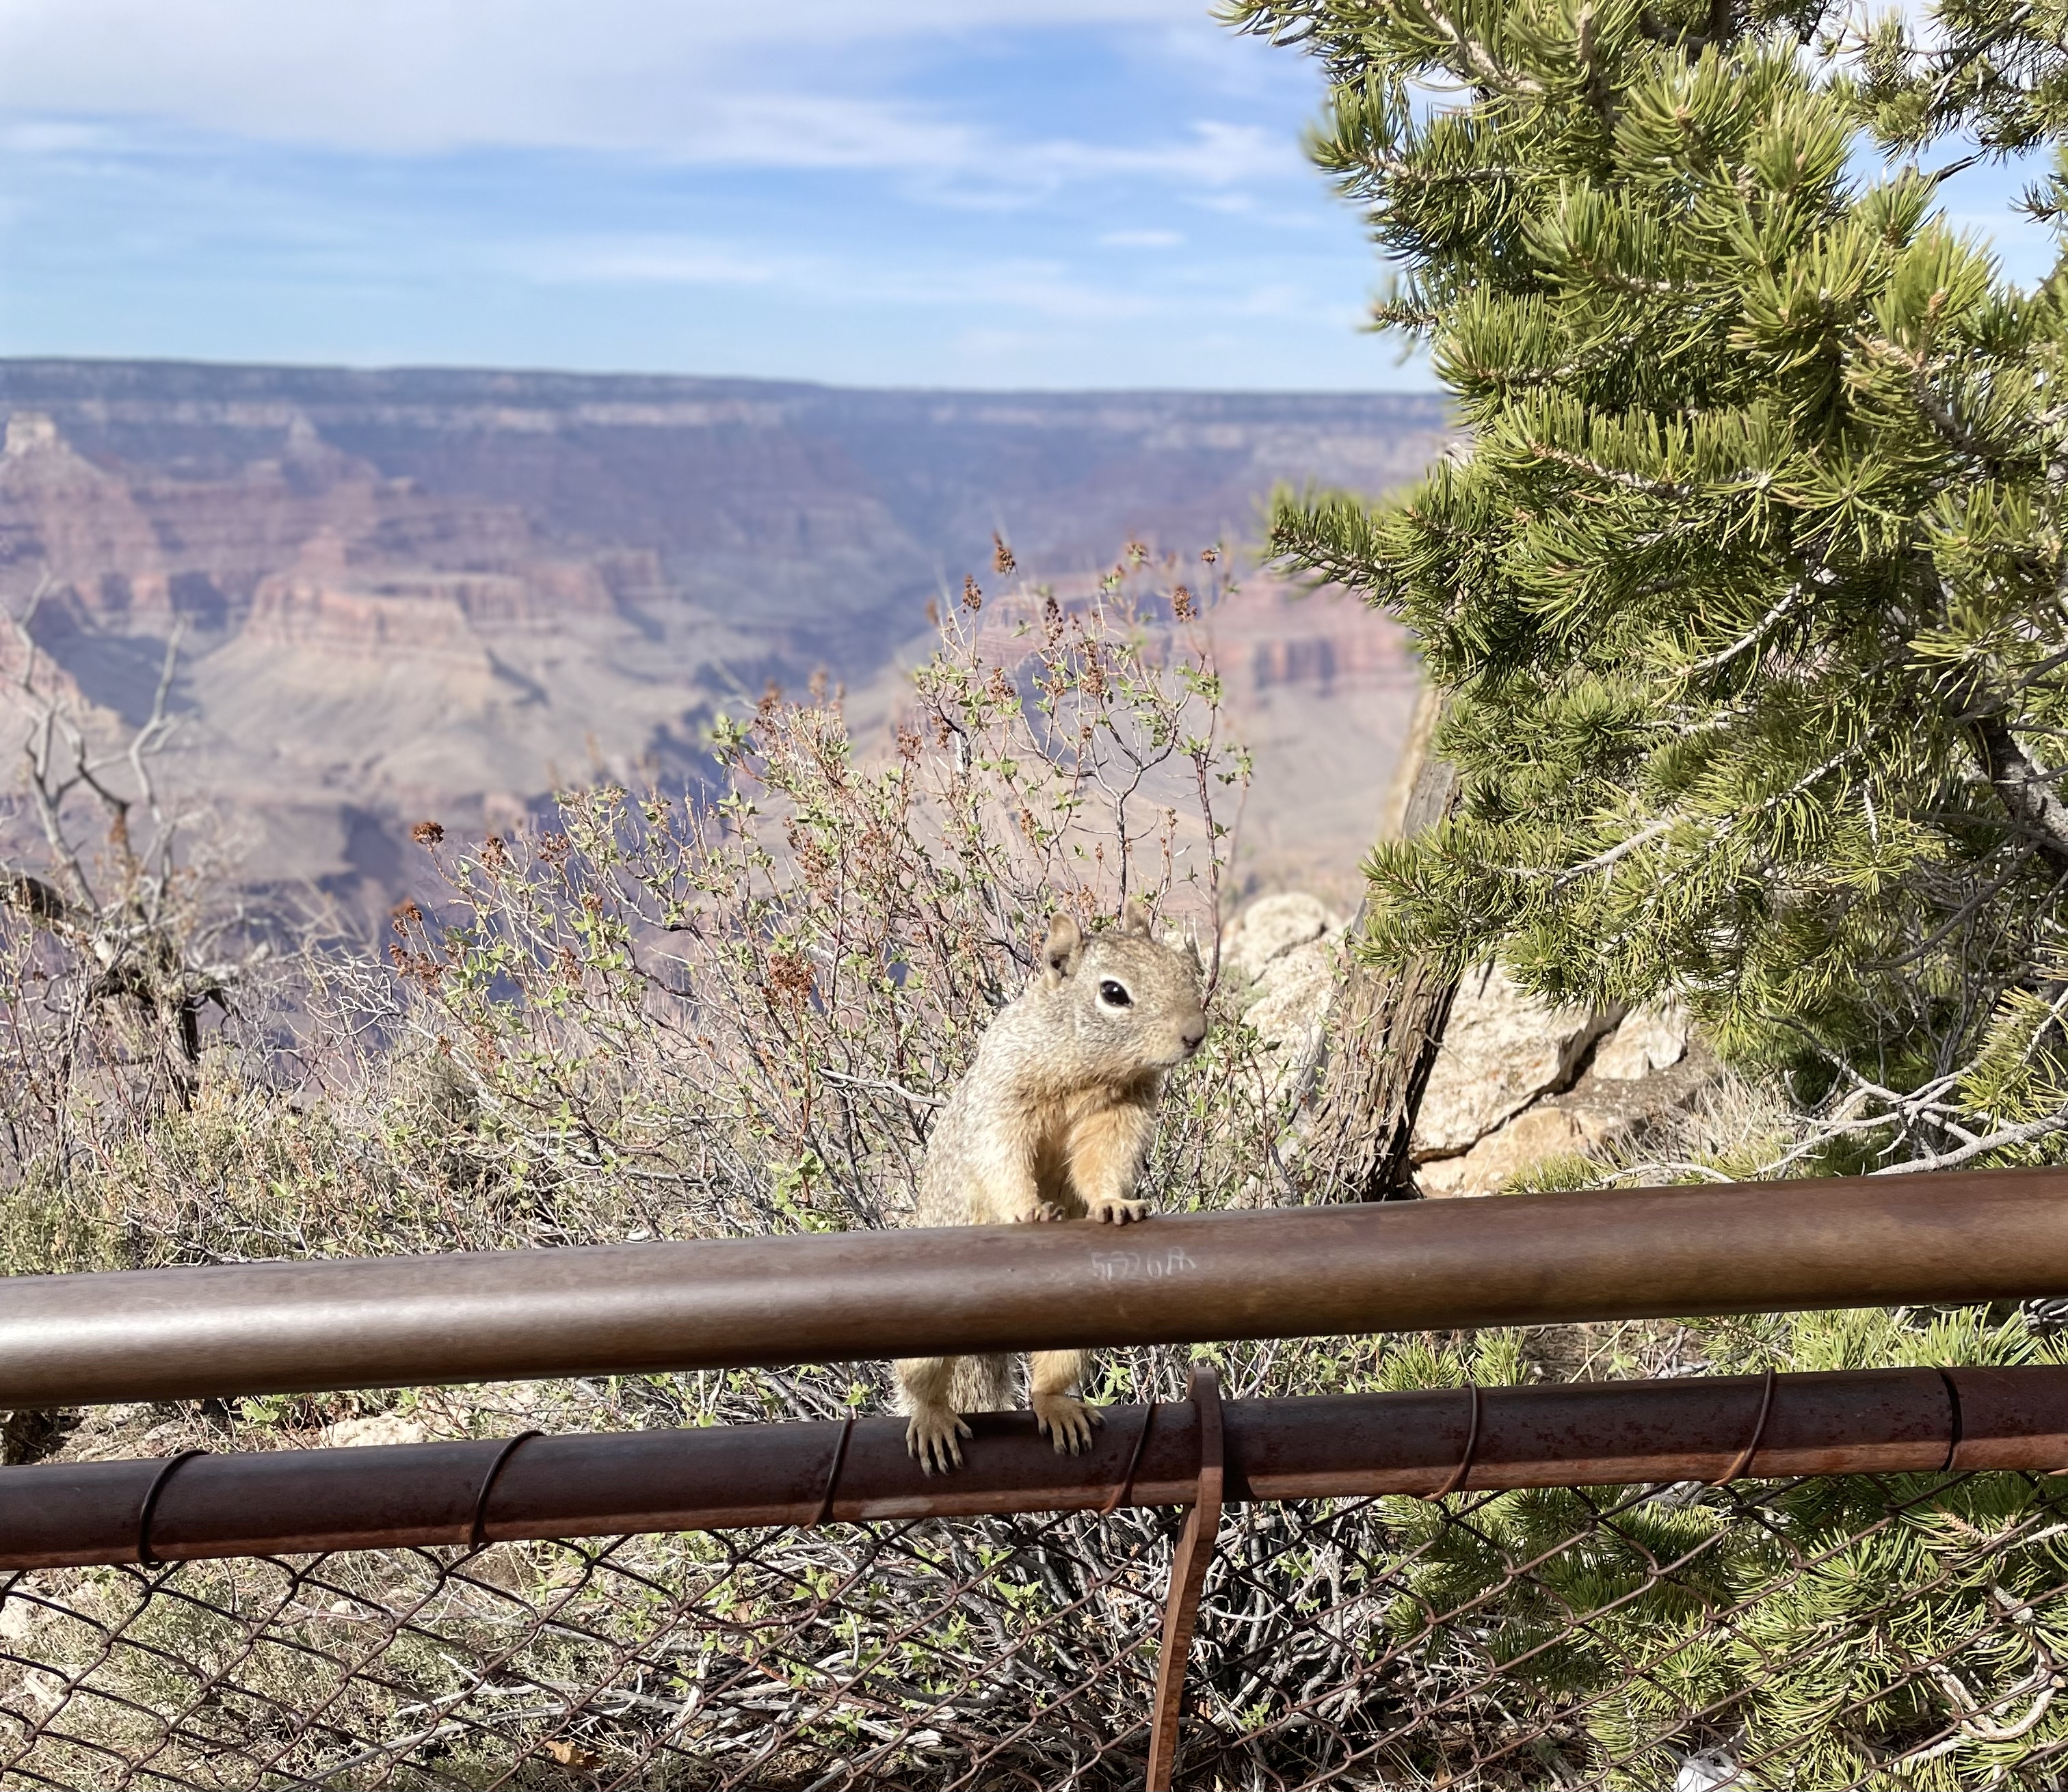 Photo by Angelia Thorsen  |  Grand Canyon Rock Squirrel!

I loved being able to visit the Grand Canyon, my dream destination! I was envious of the squirrel's permanent home and I wished I could stay there forever! This lucky squirrel was oblivious to the beauty surrounding him and only wanted snacks!